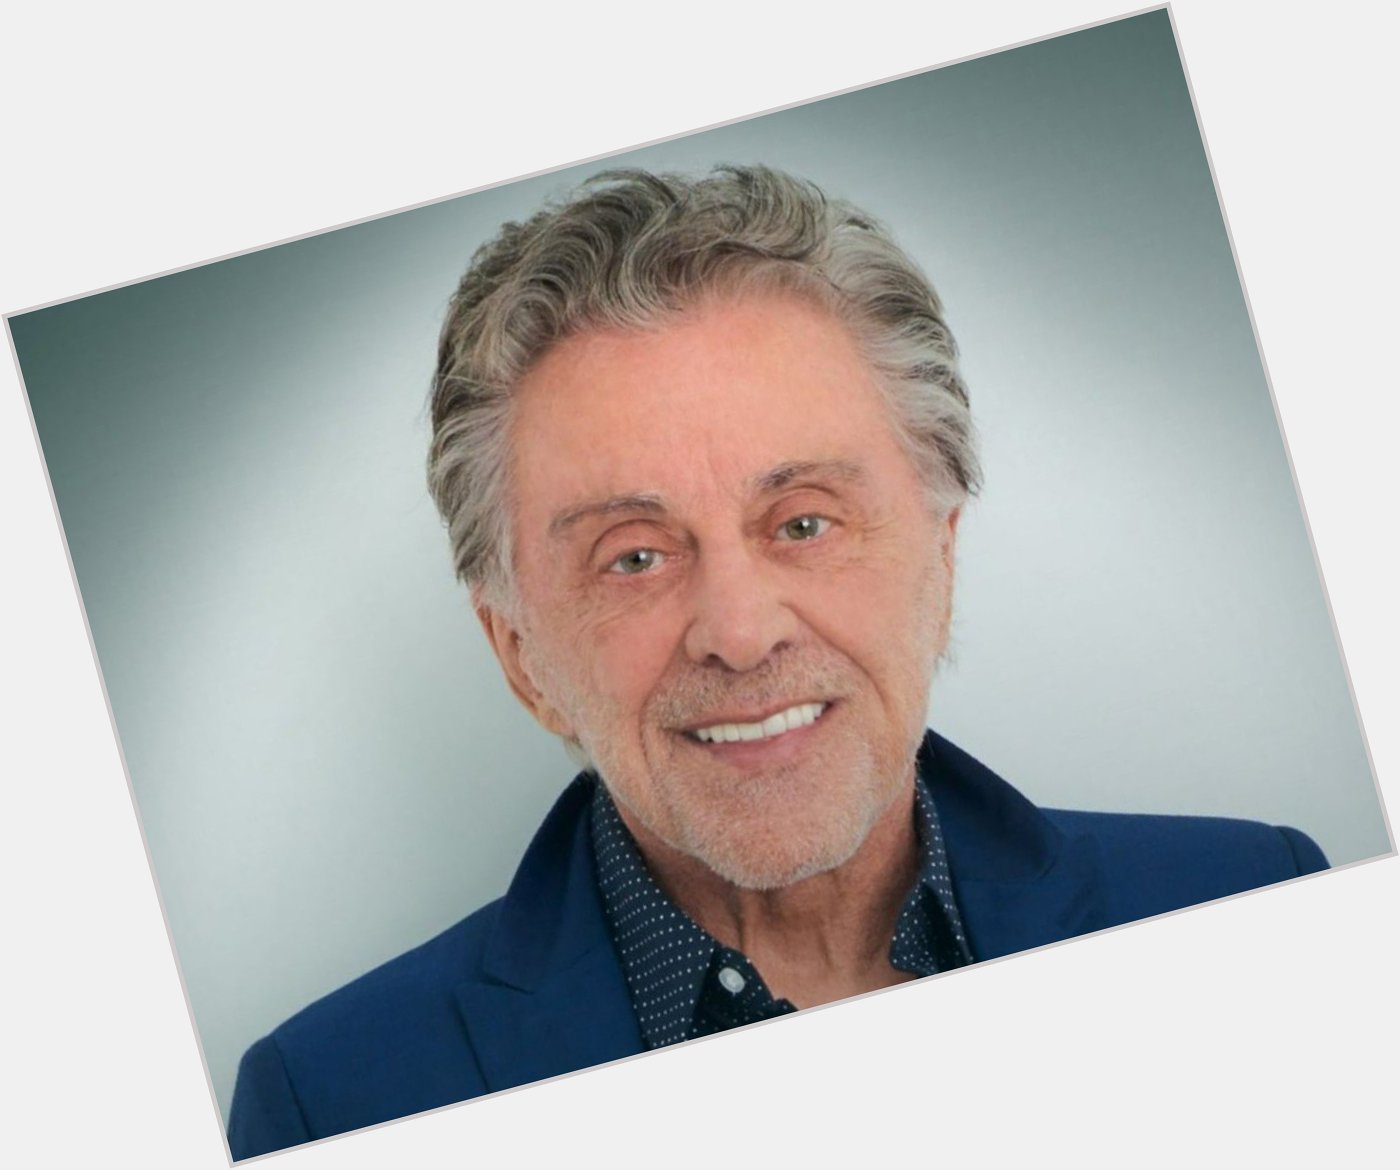 Happy 88 birthday to the amazing singer Frankie Valli, leader of The Four Seasons! 